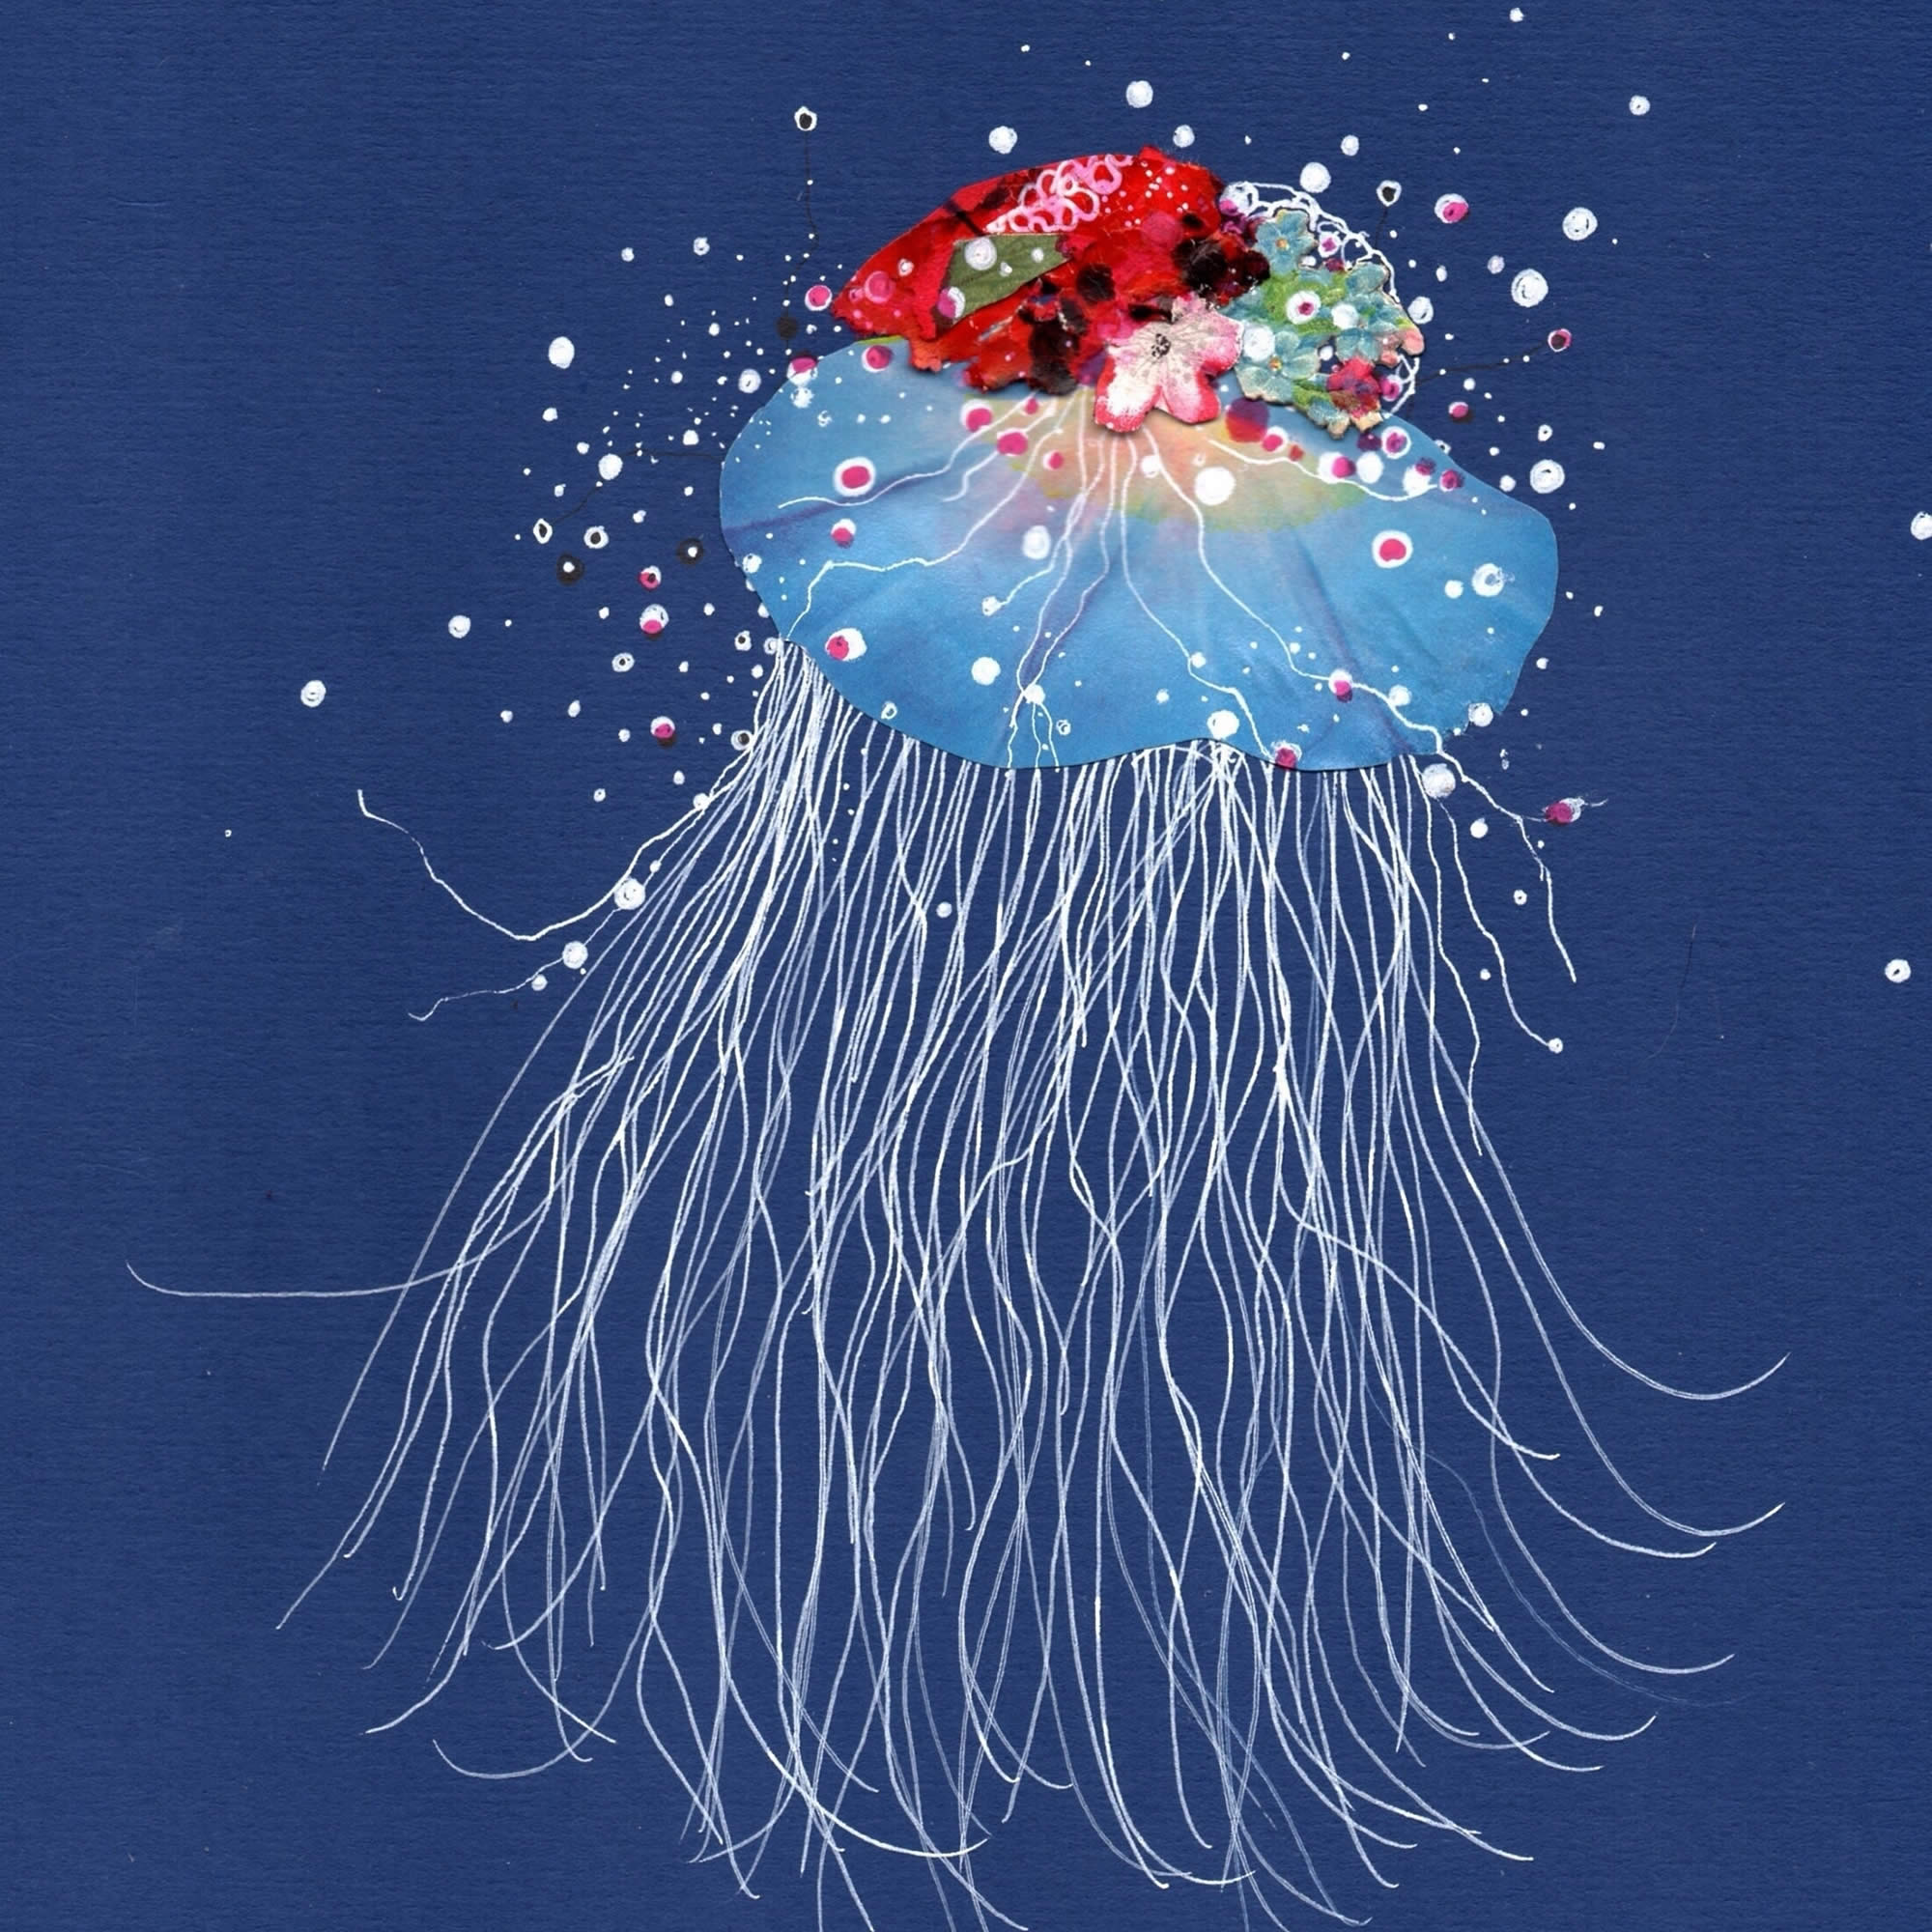 jellyfish and flowers, collage